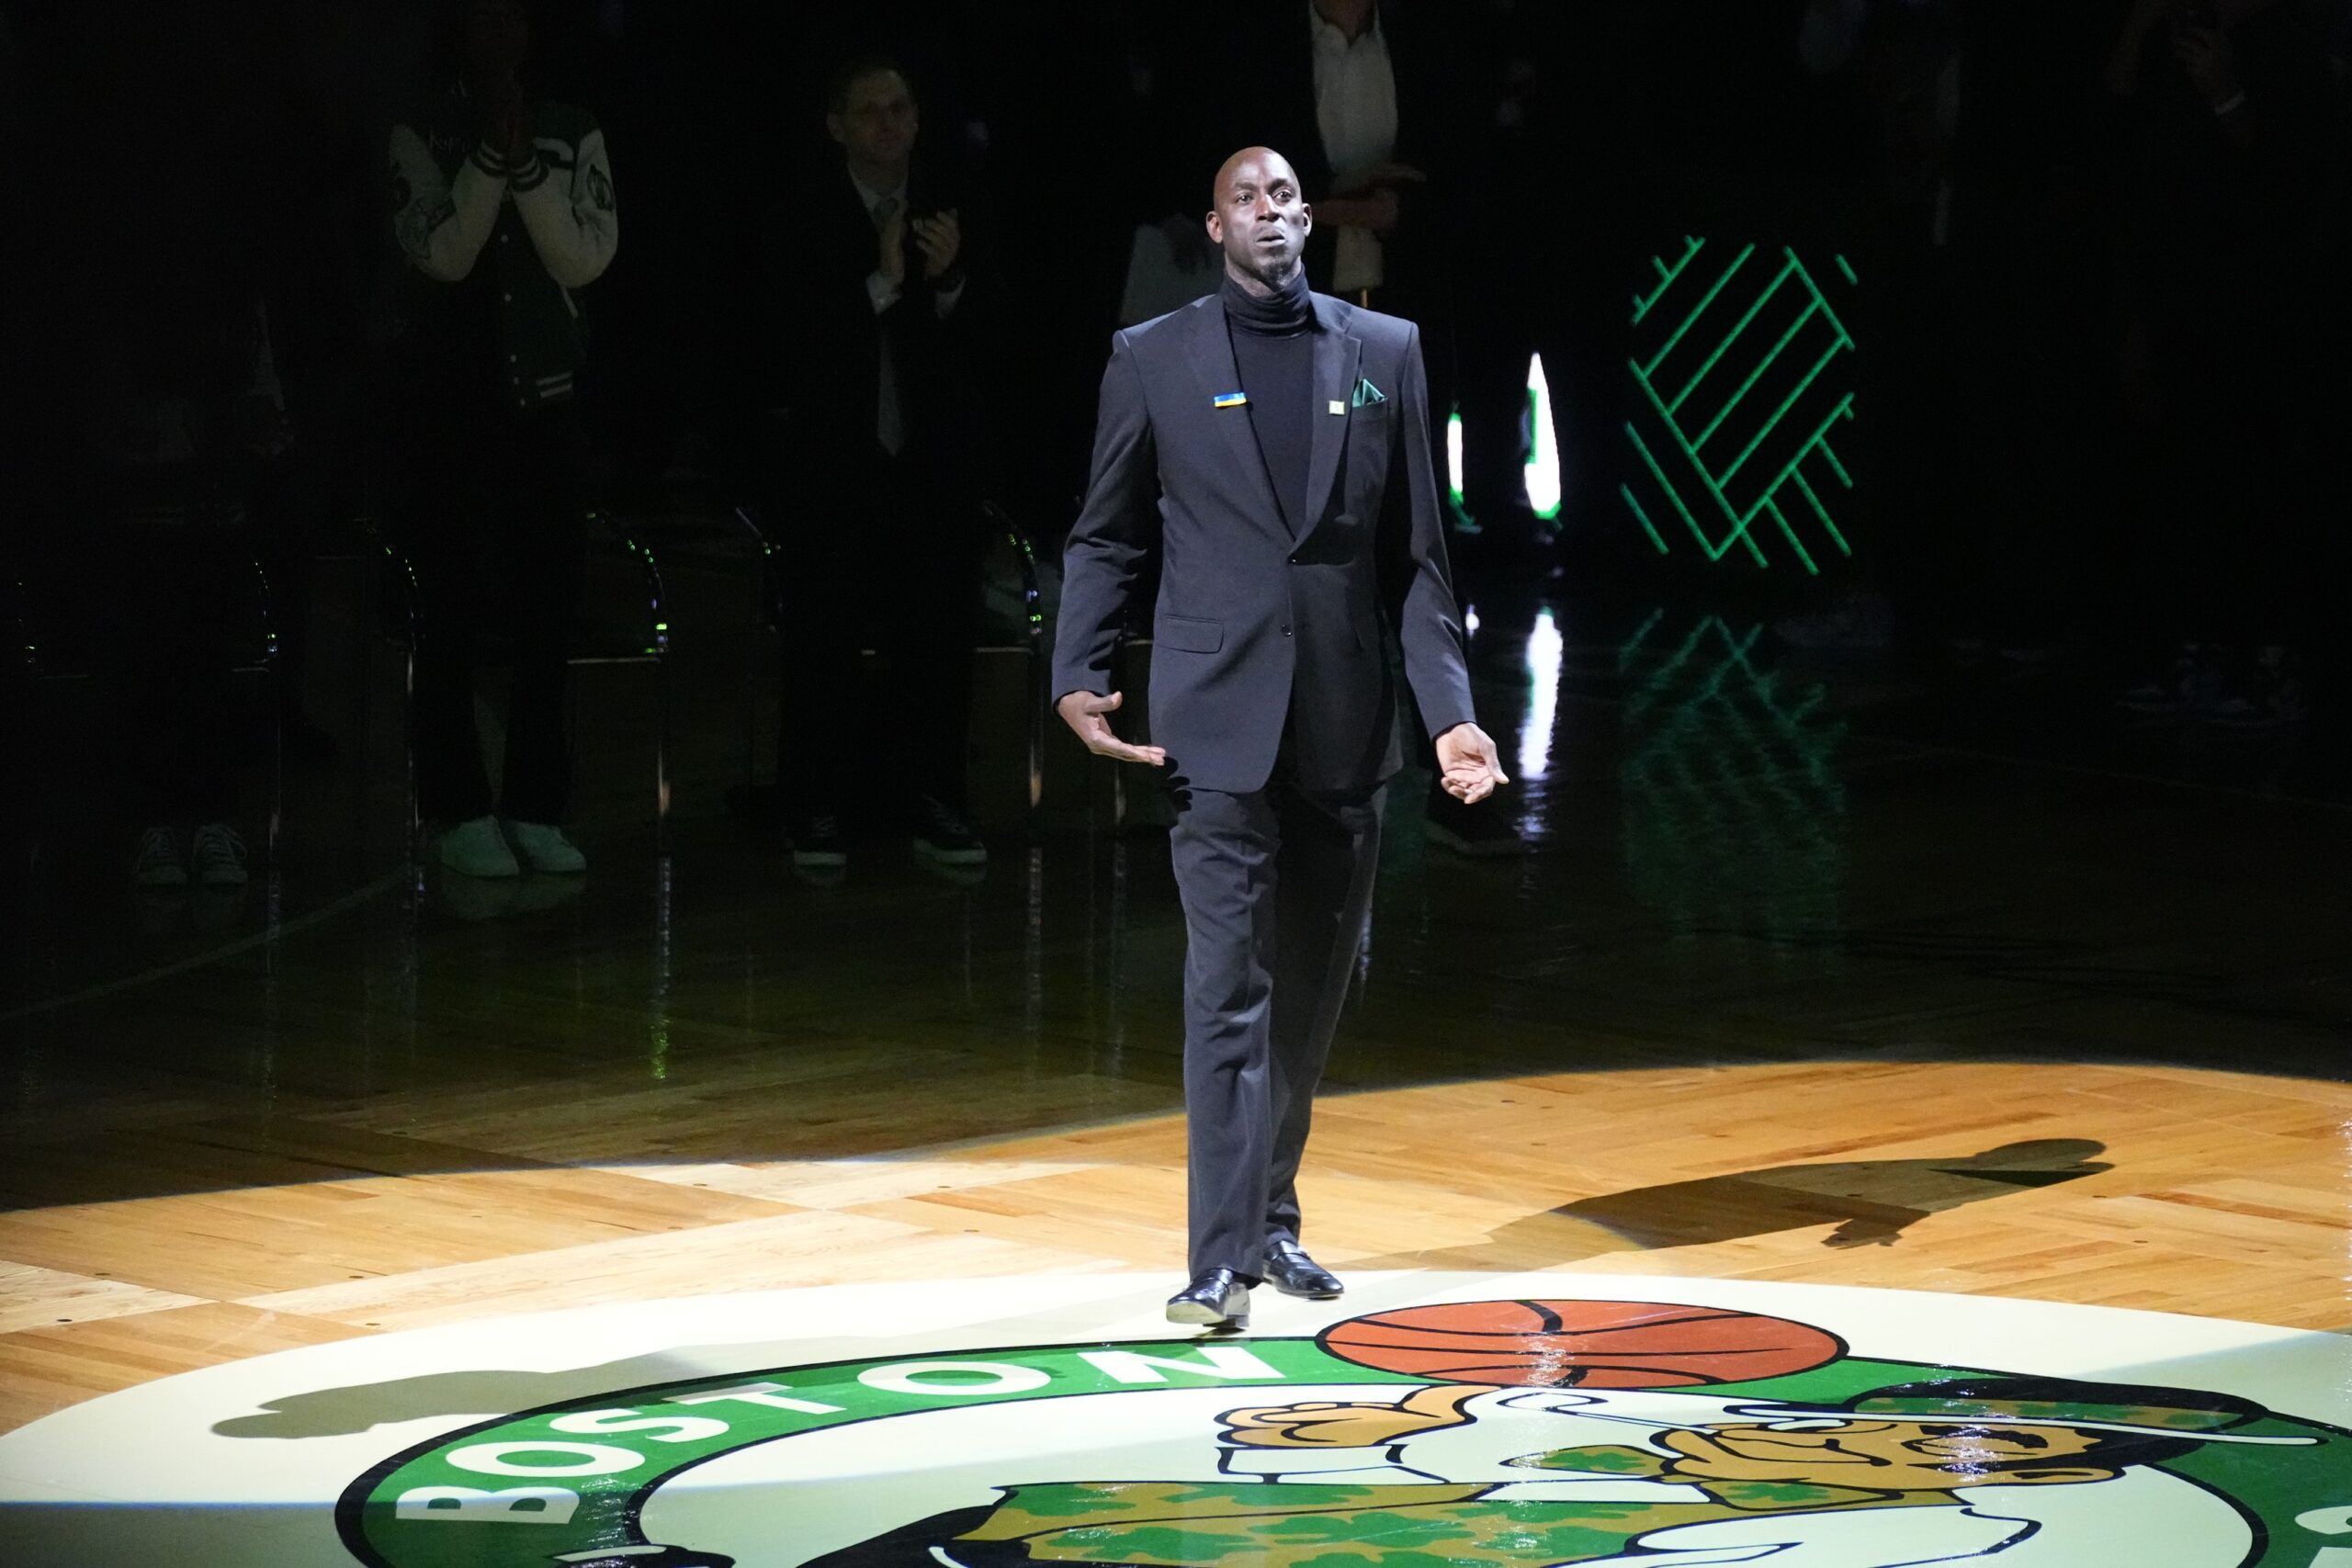 The Kevin Garnett trade for the Boston Celtics changed the fortunes of the franchise immediately.